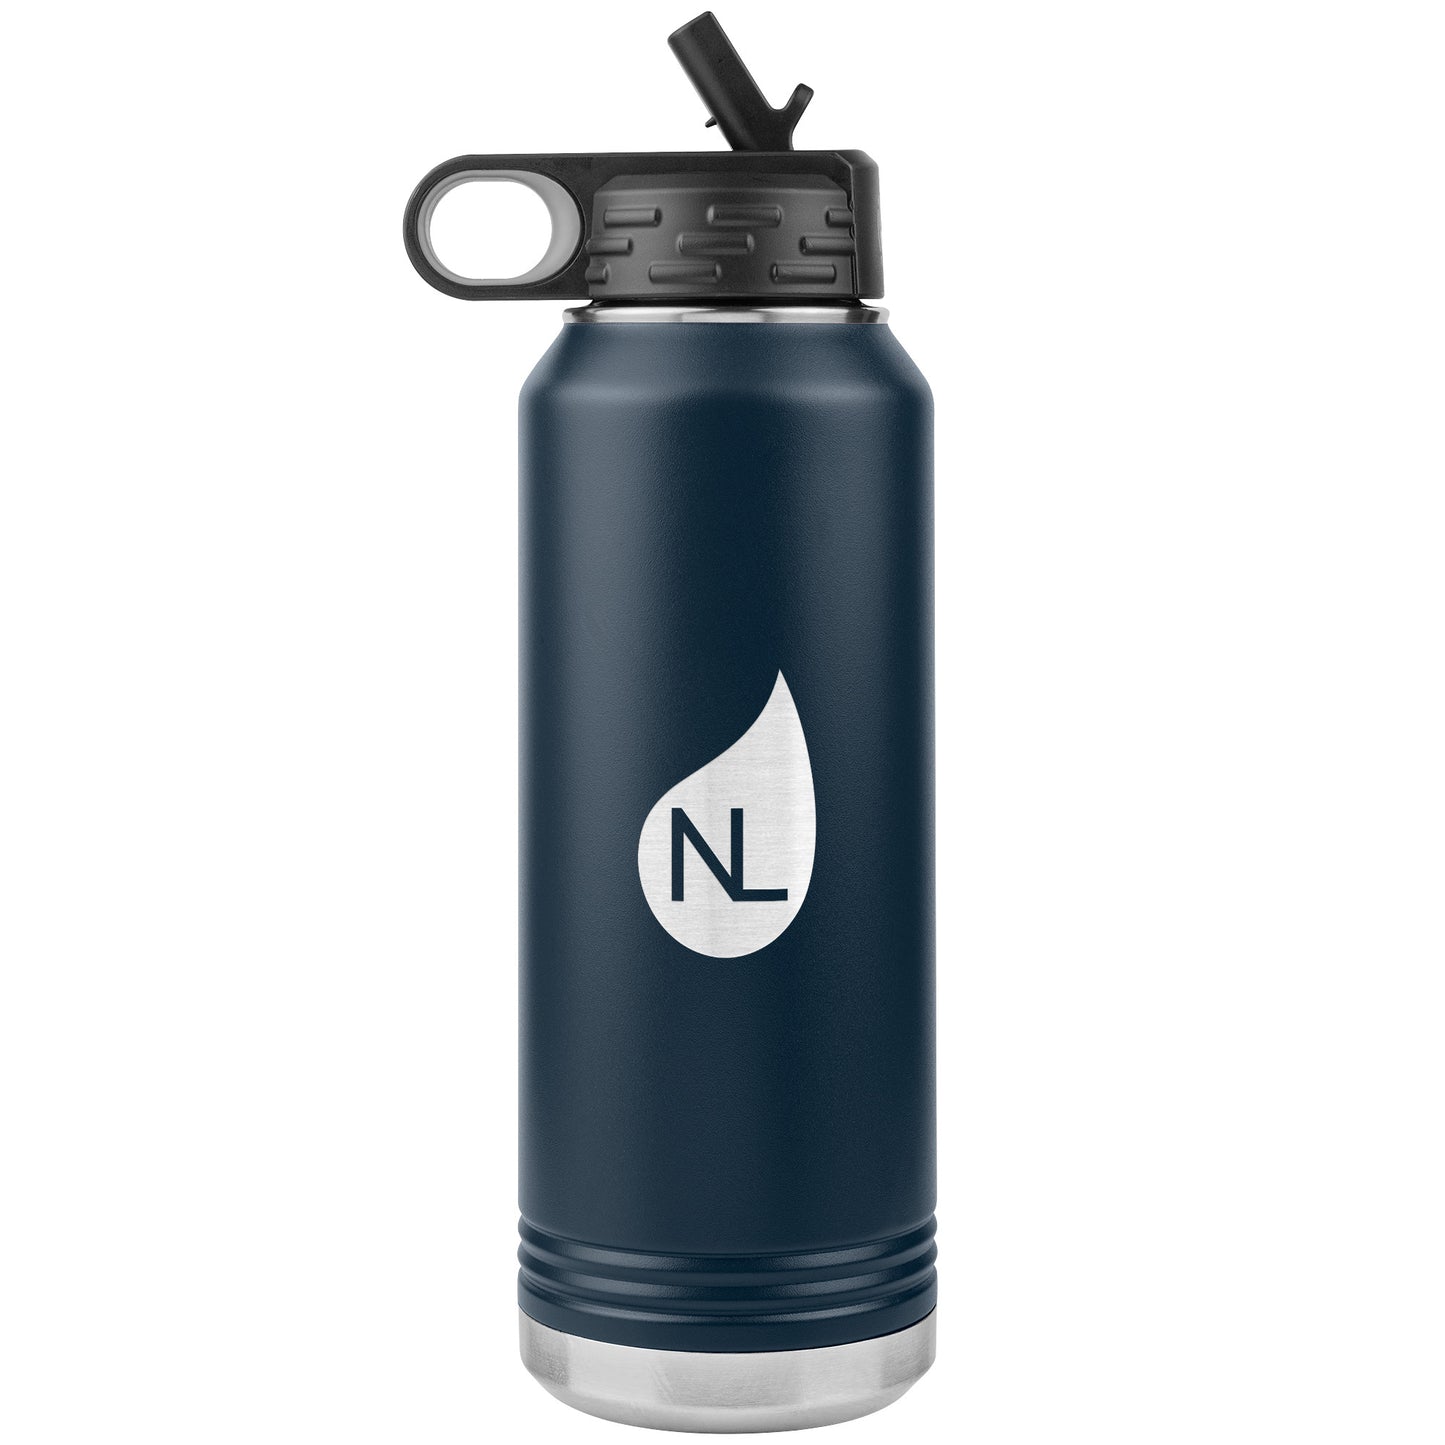 NL ICON Insulated Water Bottle